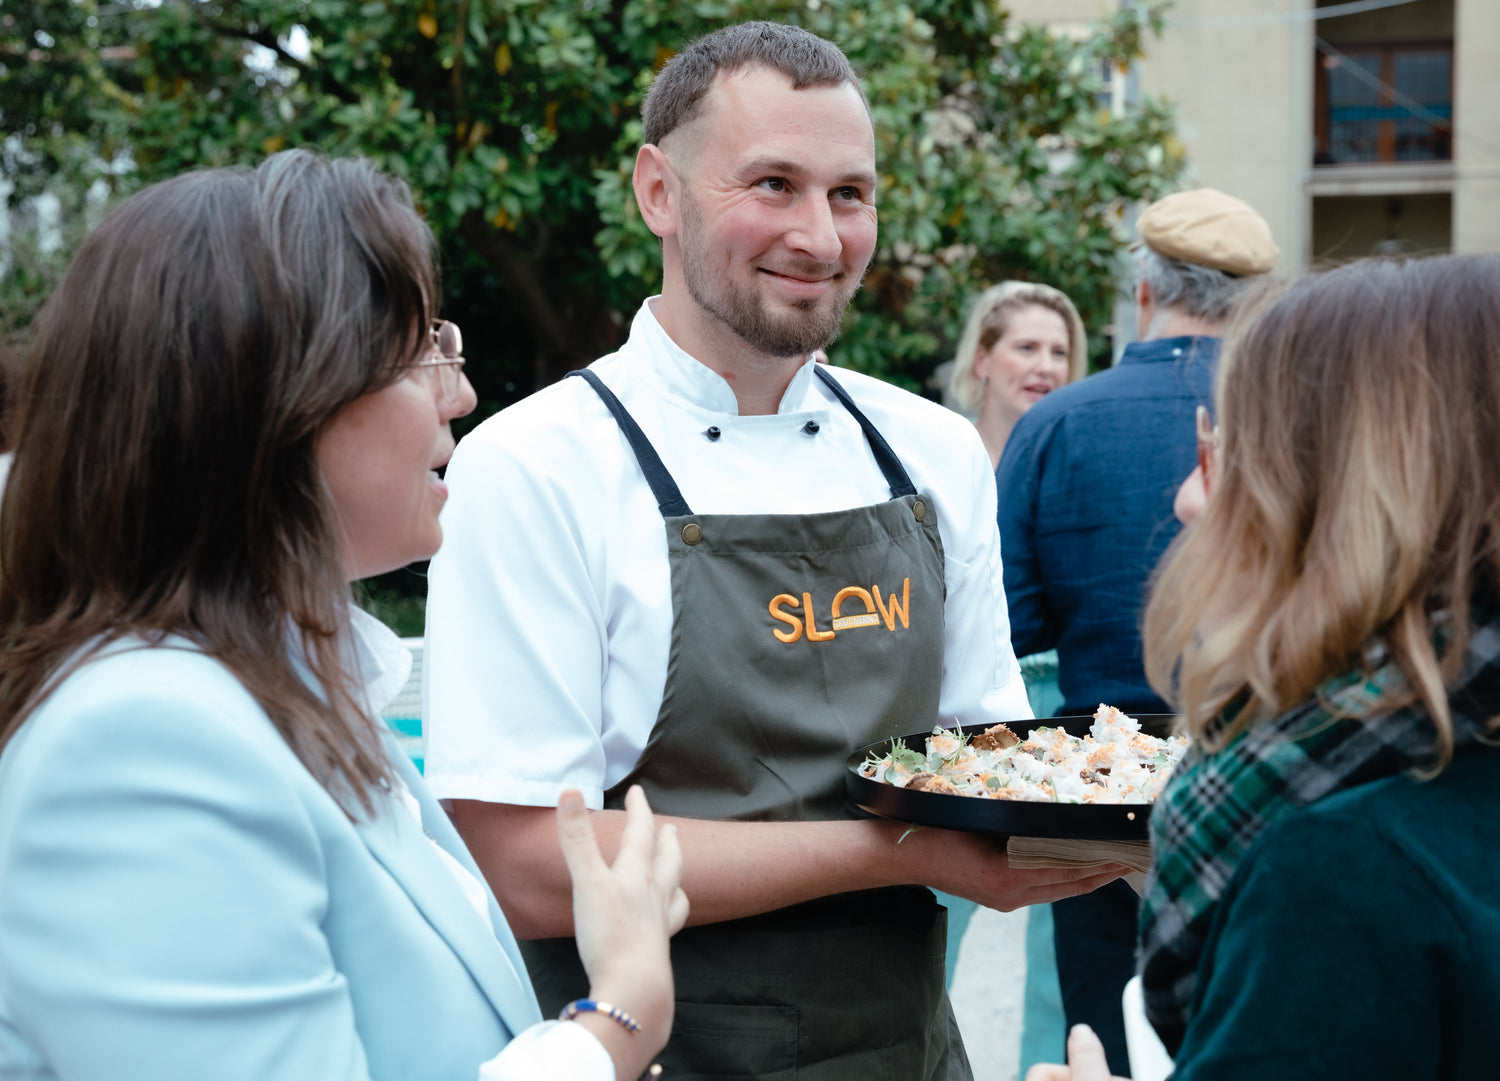 Chase serving canapes at Ester Perells' podcast recording at the White house st kilda for Small Giants Academy. The black tray has confit Ottoway shiitake mushrooms with white fungus, mushroom floss and a crispy sesame rice cracker.